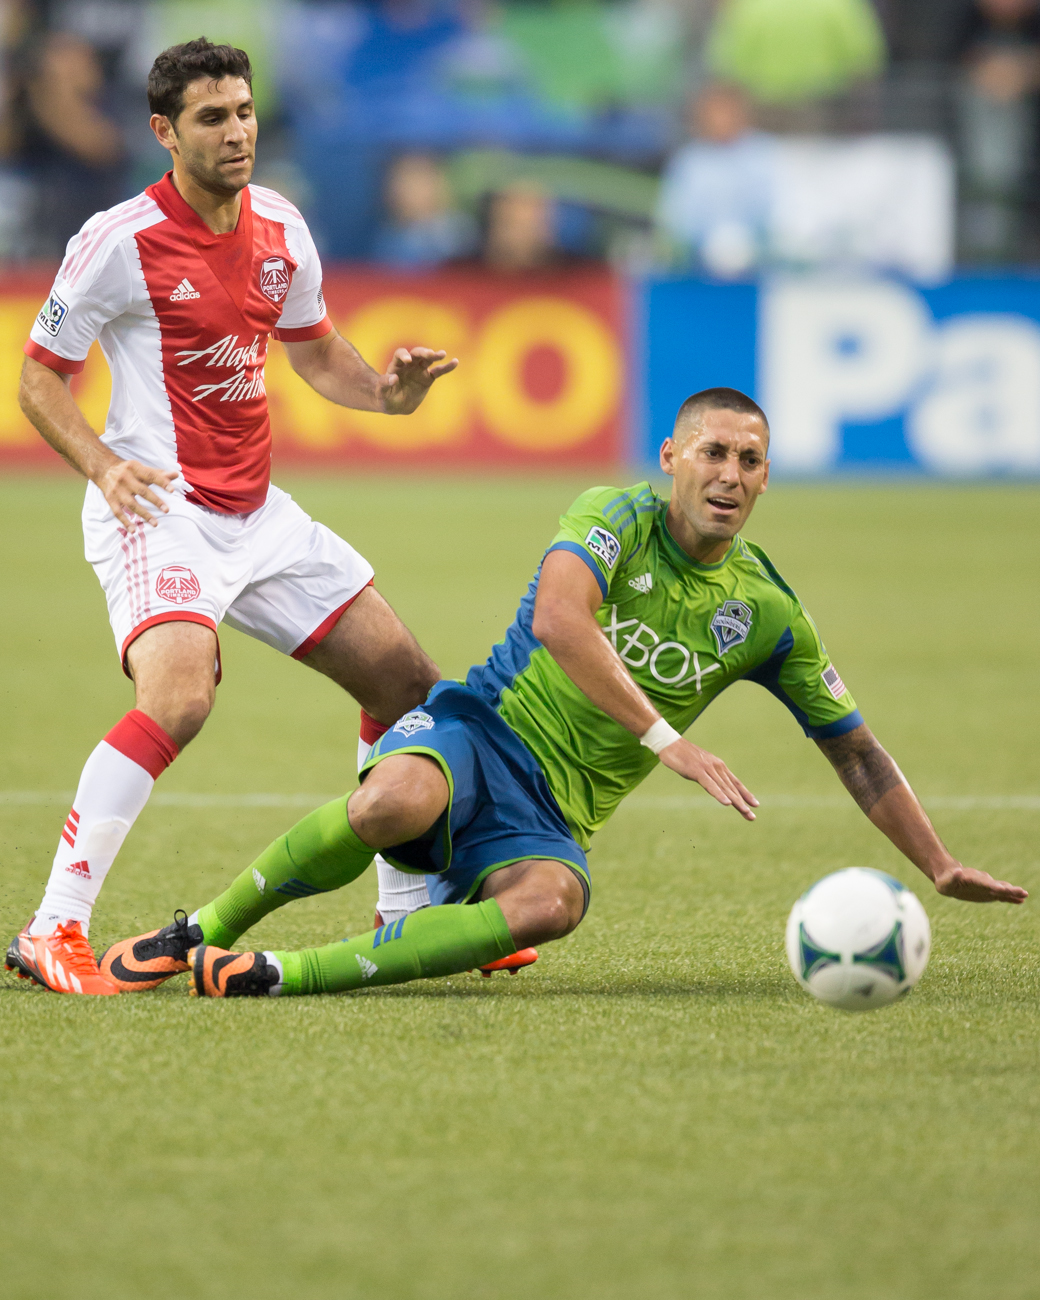 Dempsey gets tripped up by a Timbers player.